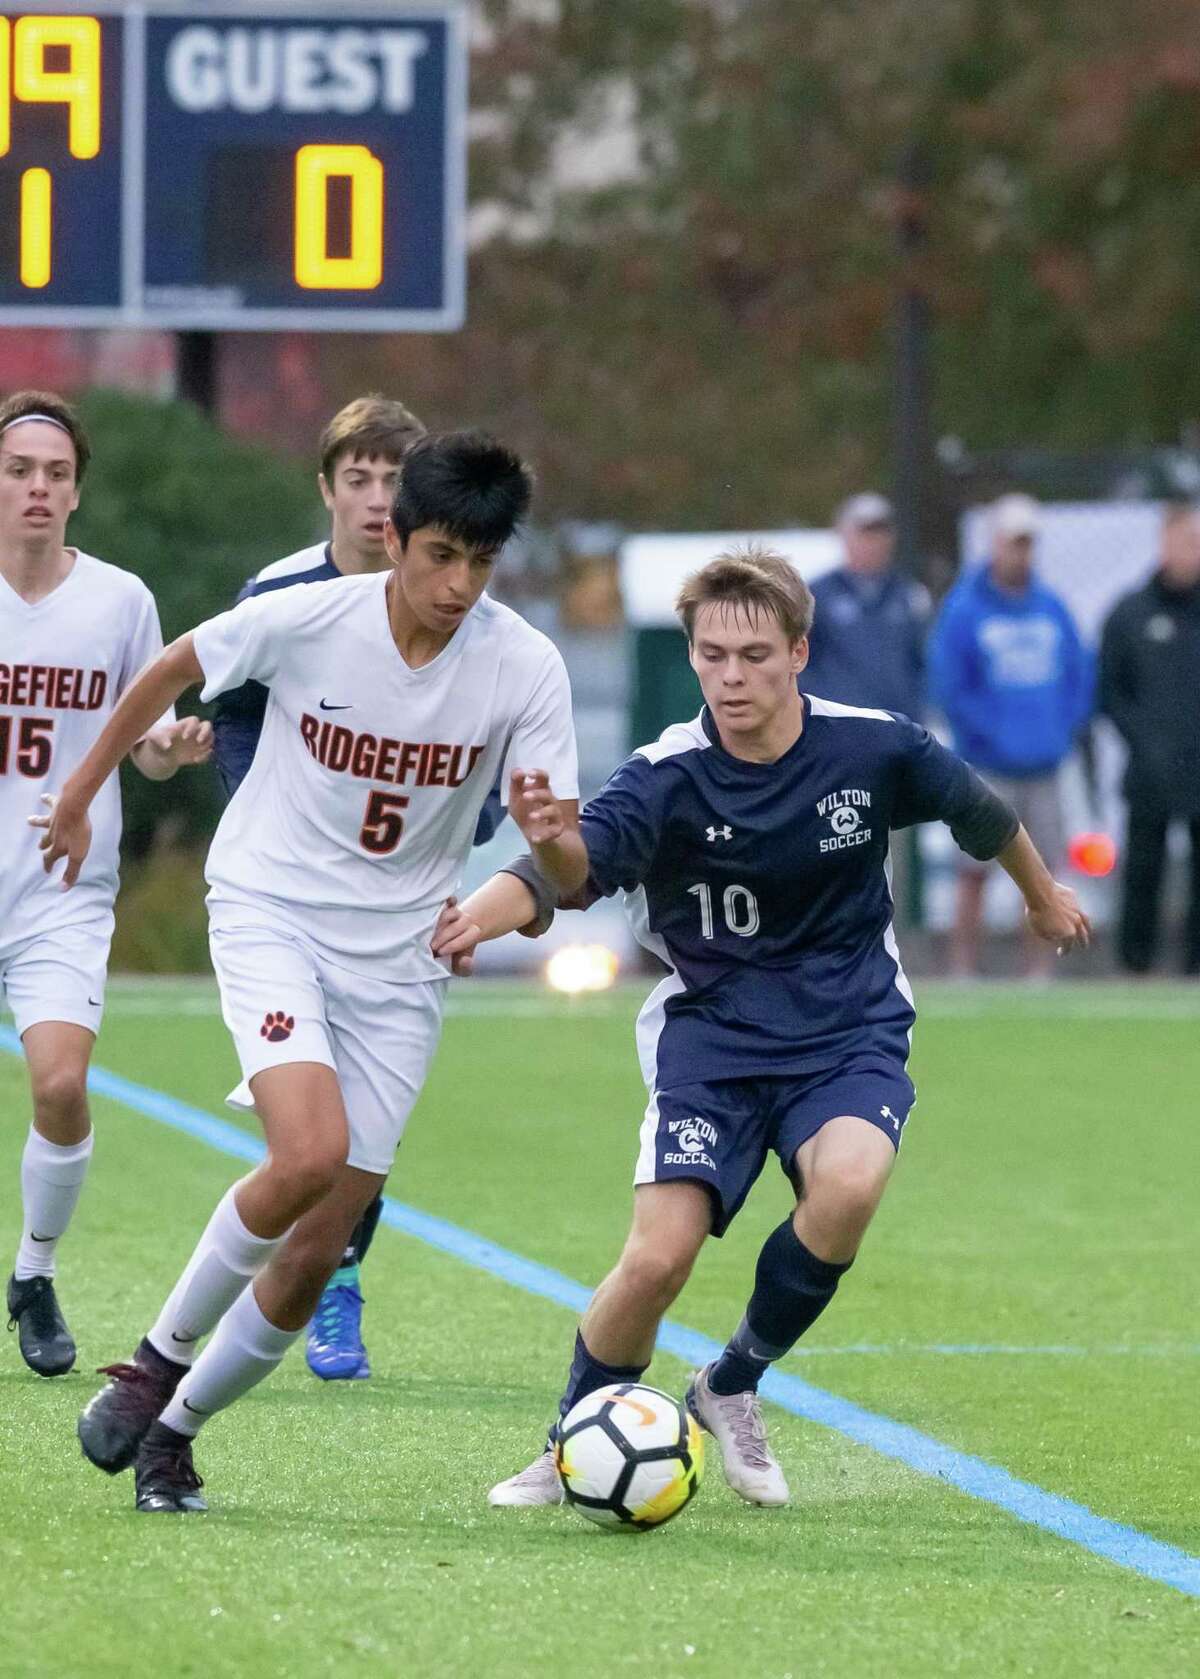 Wilton's Connor Uitterdijk (right) vies for the ball with Ridgefield's Ludwin Godoy during Tuesday's 1-1 tie.